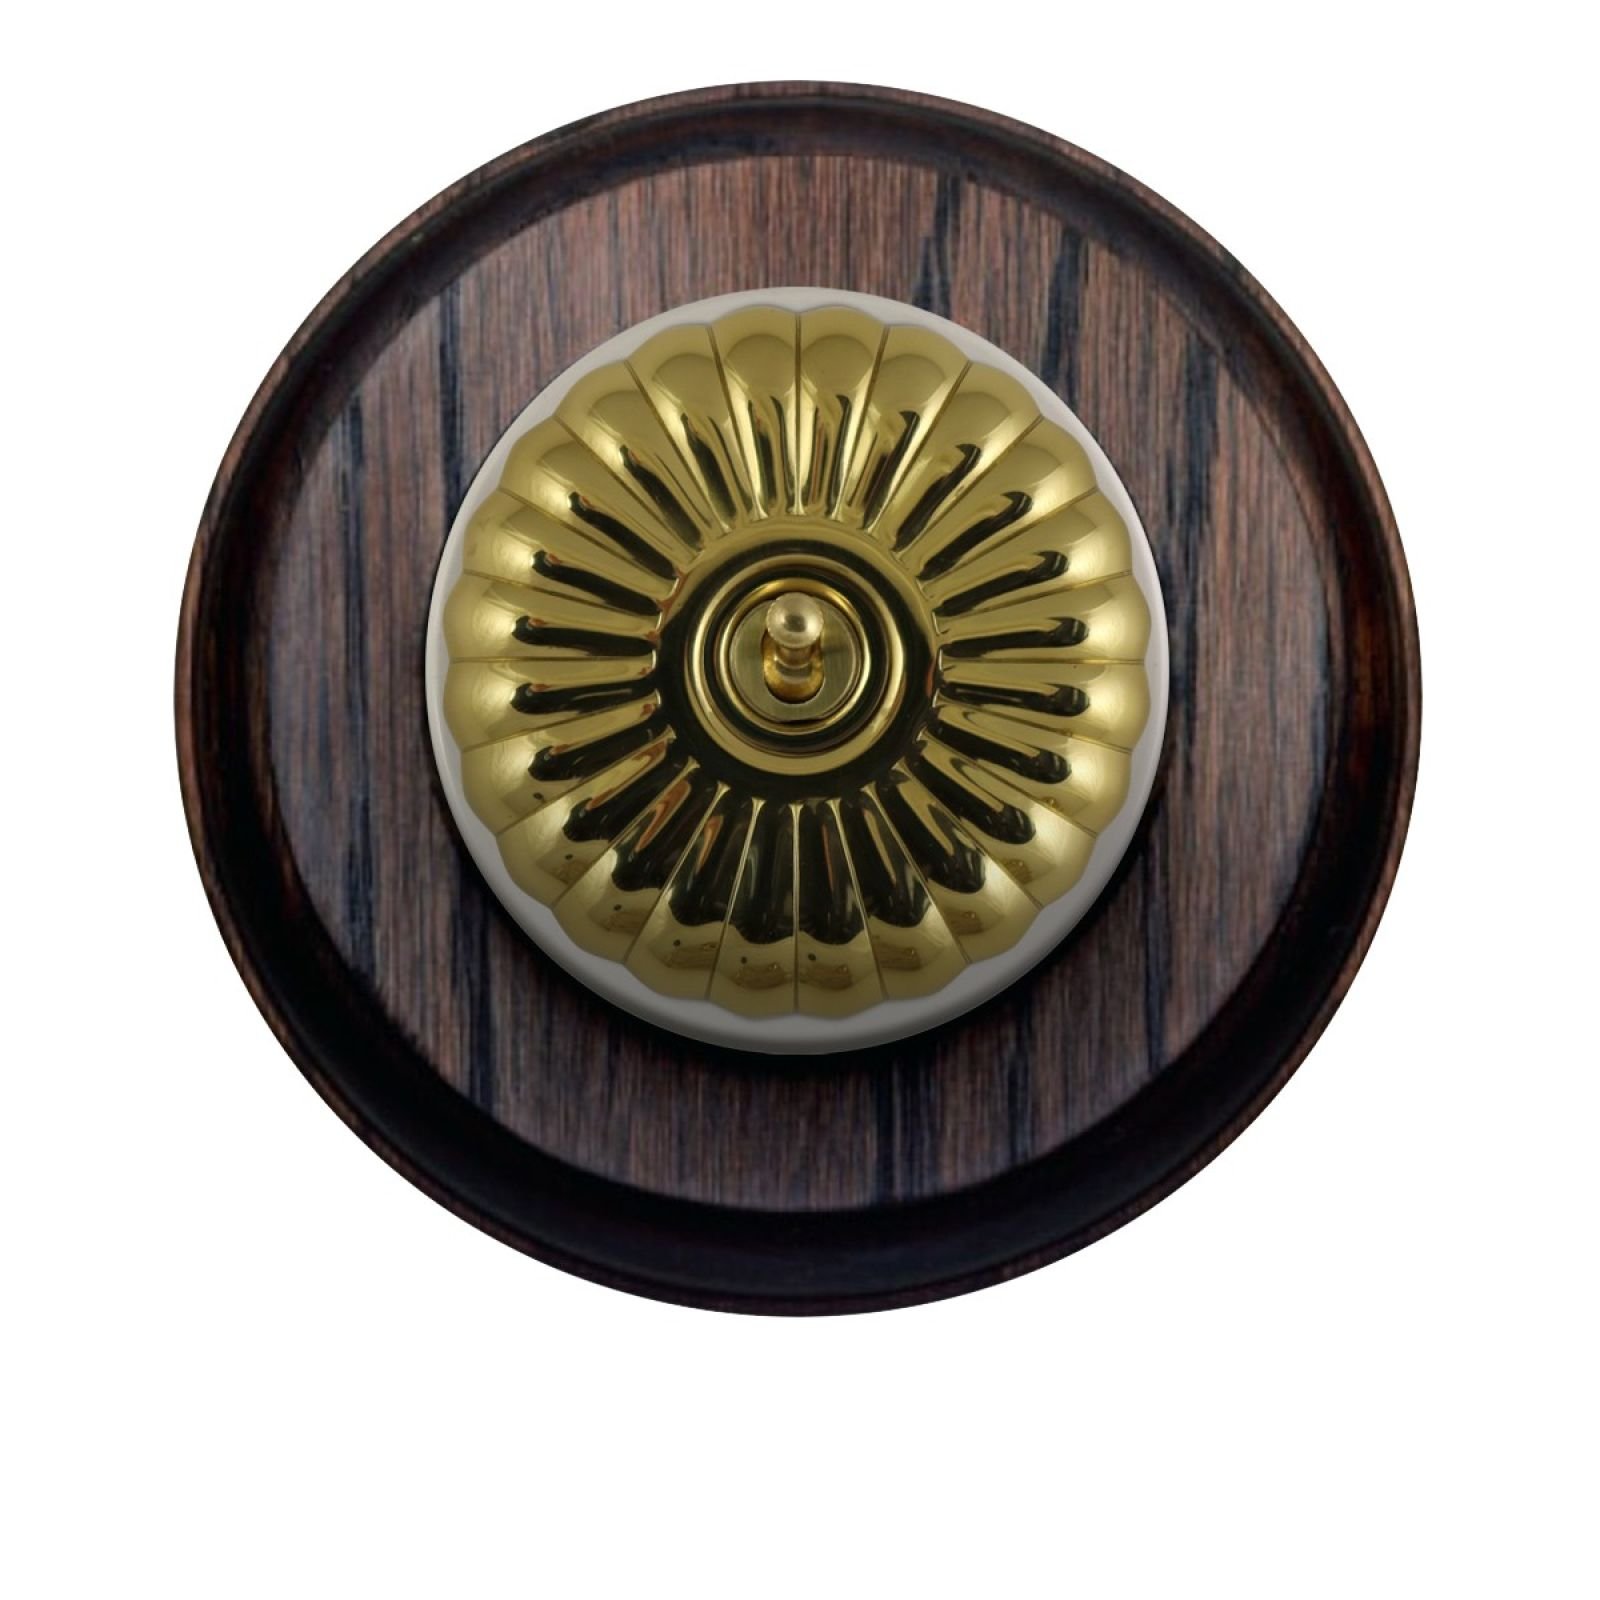 1 gang period light switch - round, fluted in antique or polished brass